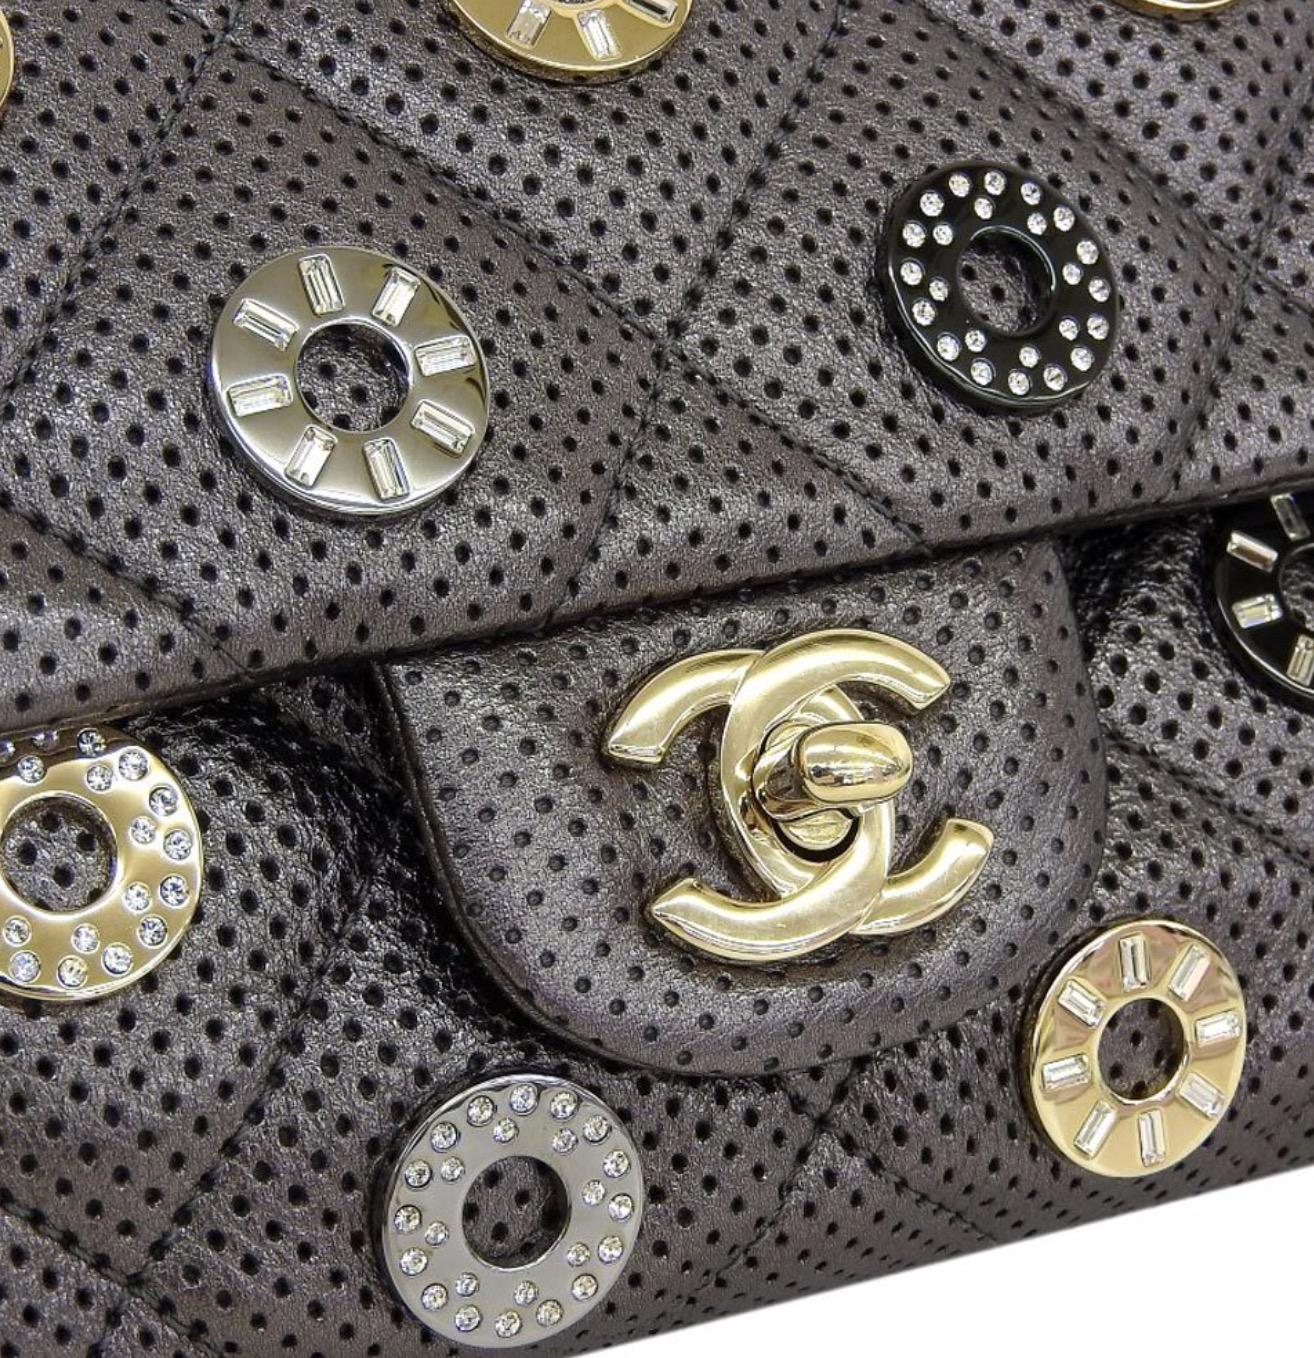 Leather
Gold tone hardware
Rhinestone 
Woven lining
Turnlock closure
Made in Italy
Shoulder strap drop 23